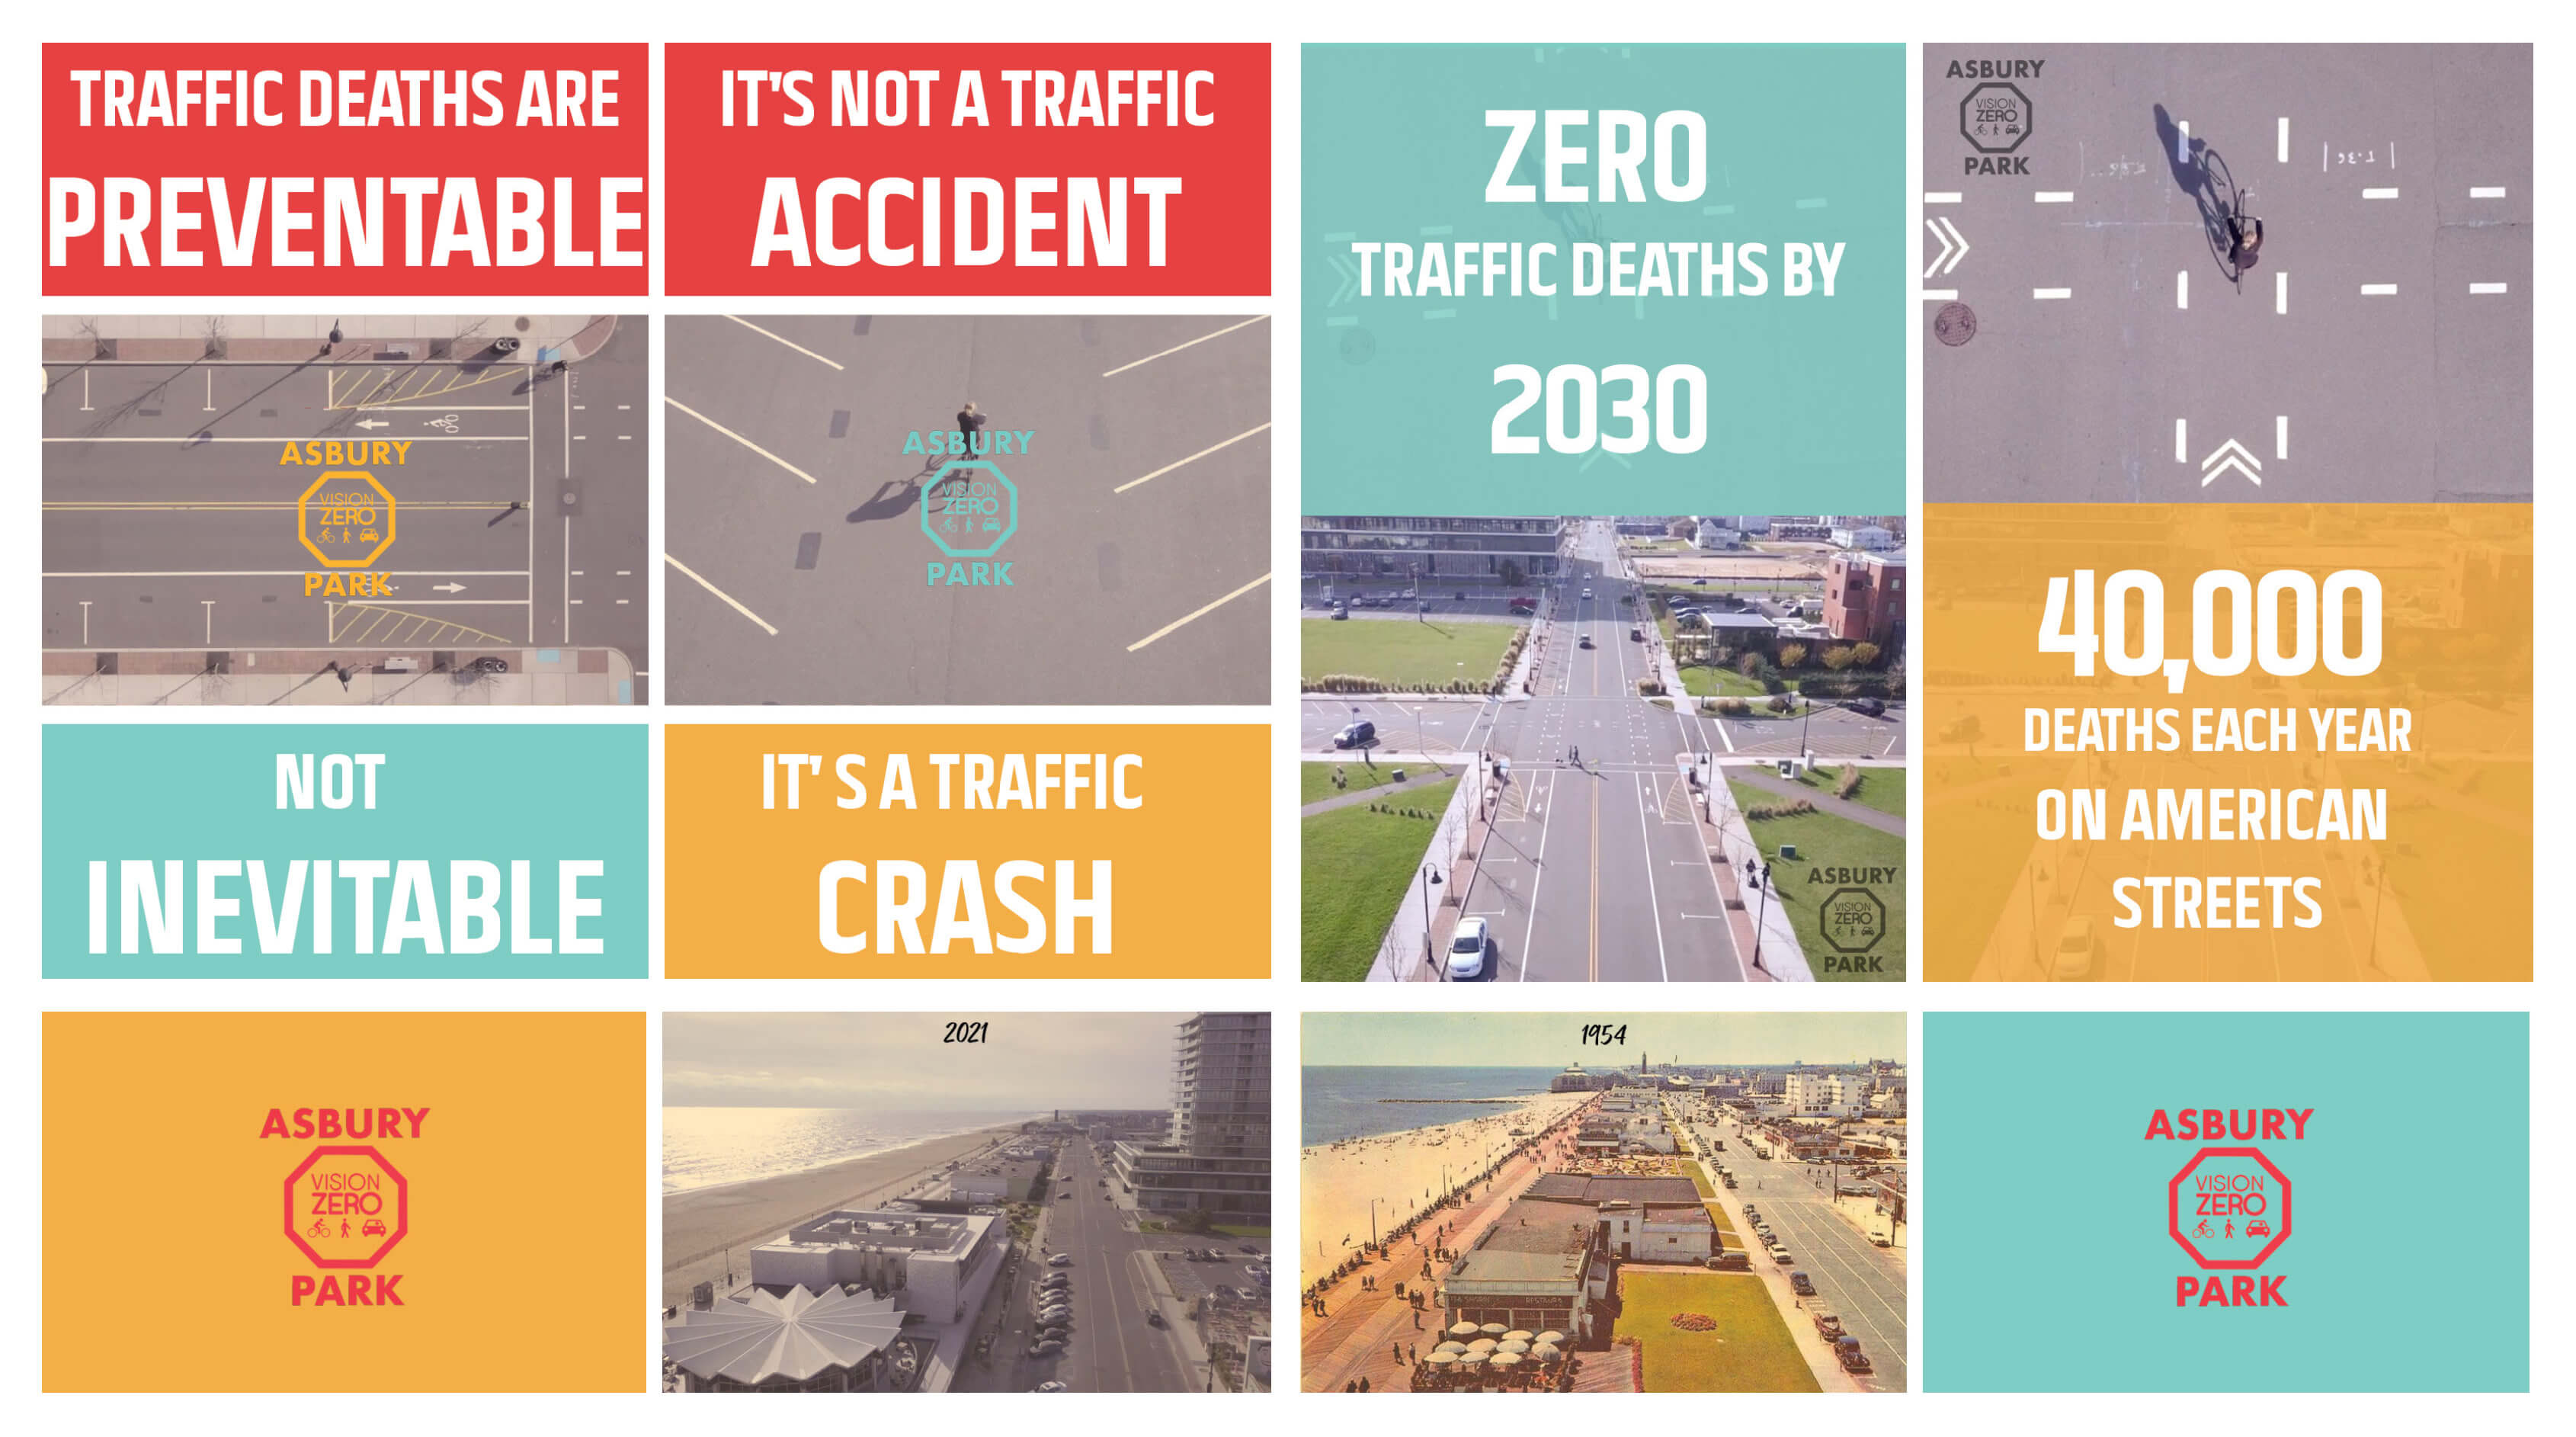 Poster by graduate students Skylar Smith and Stella Clark - Traffic Deaths Are Preventable - click or tap image to access web site for Asbury Park Complete Streets Coalition